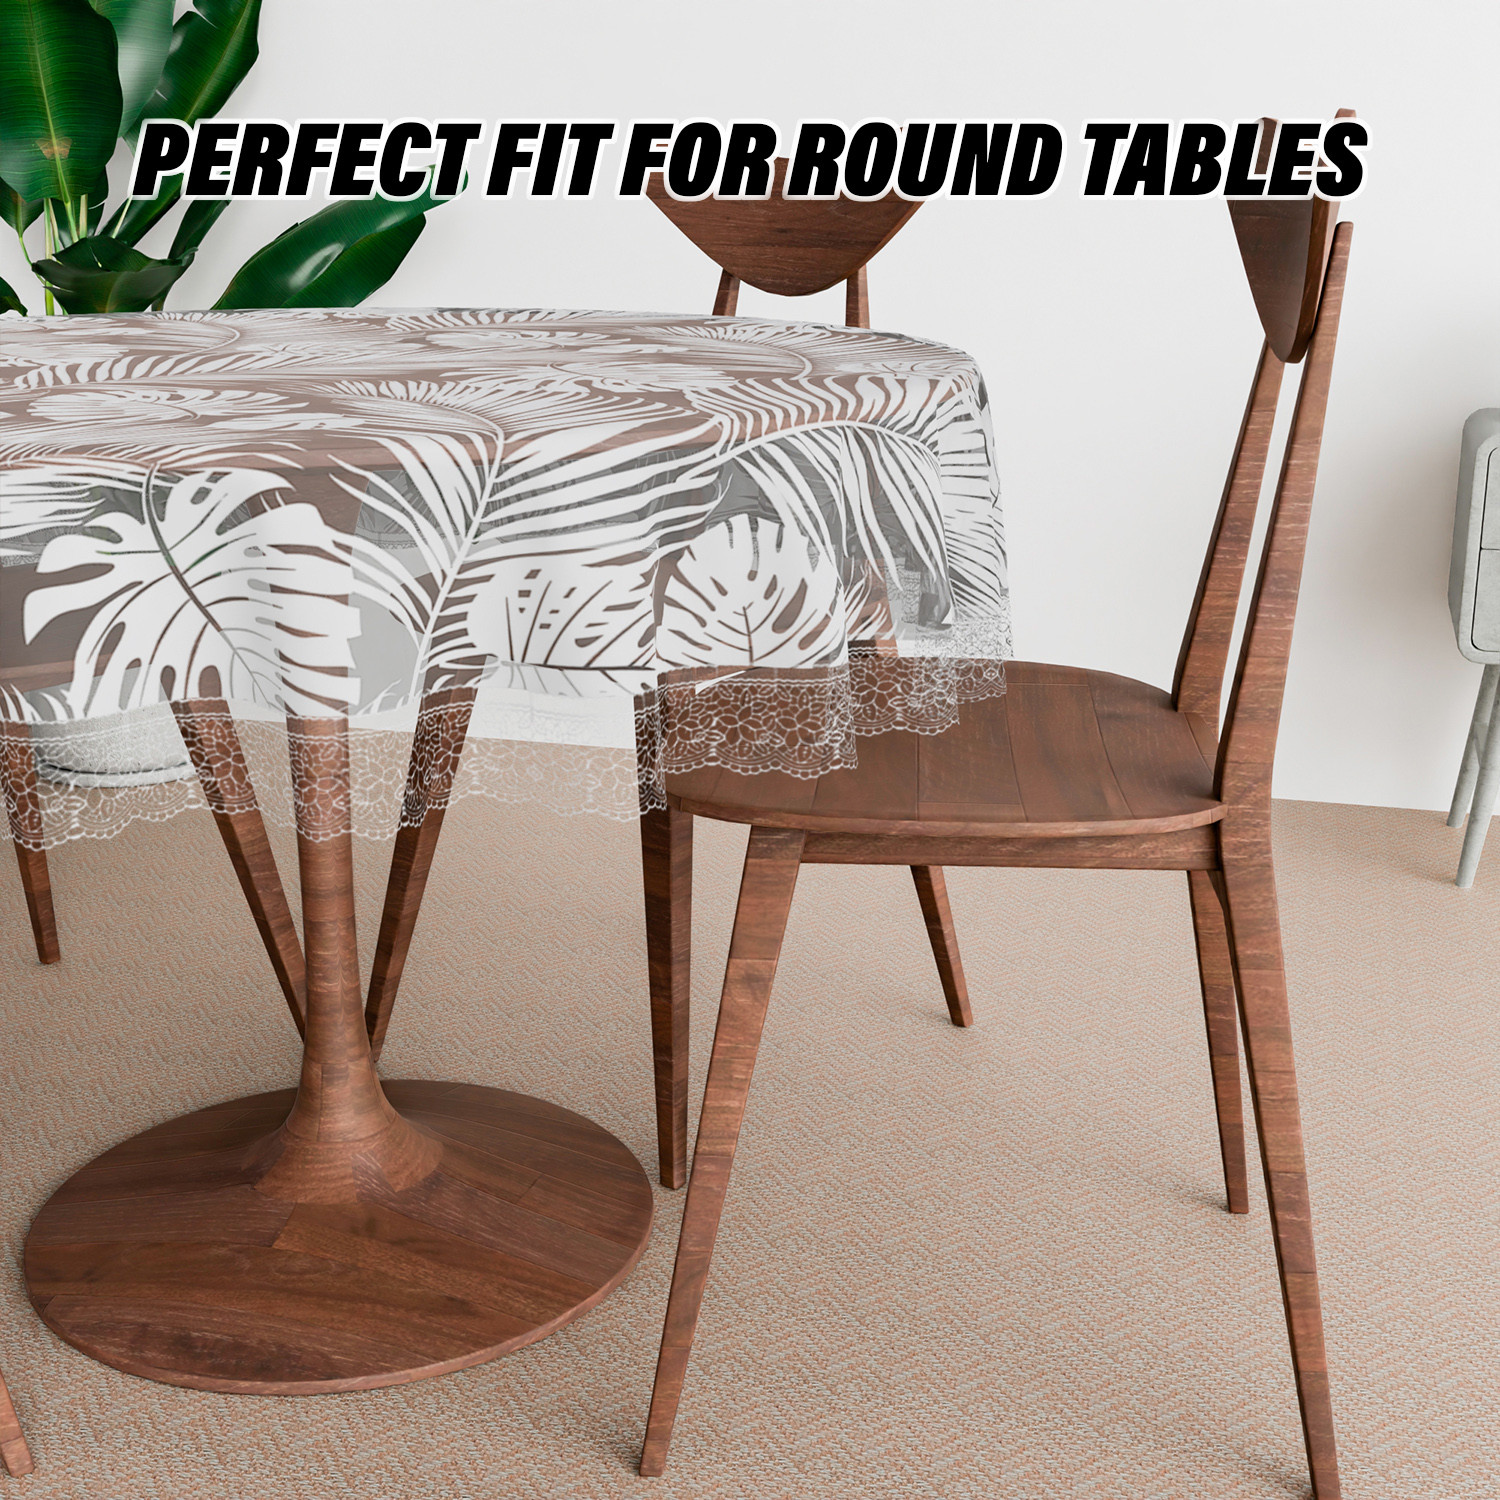 Kuber Industries Round Table Cover | PVC Table Cloth for Round Tables | 4 Seater Round Table Cloth | Self Leaf Kitchen Dining Tablecloth | Tabletop Cover | 60 Inch | White